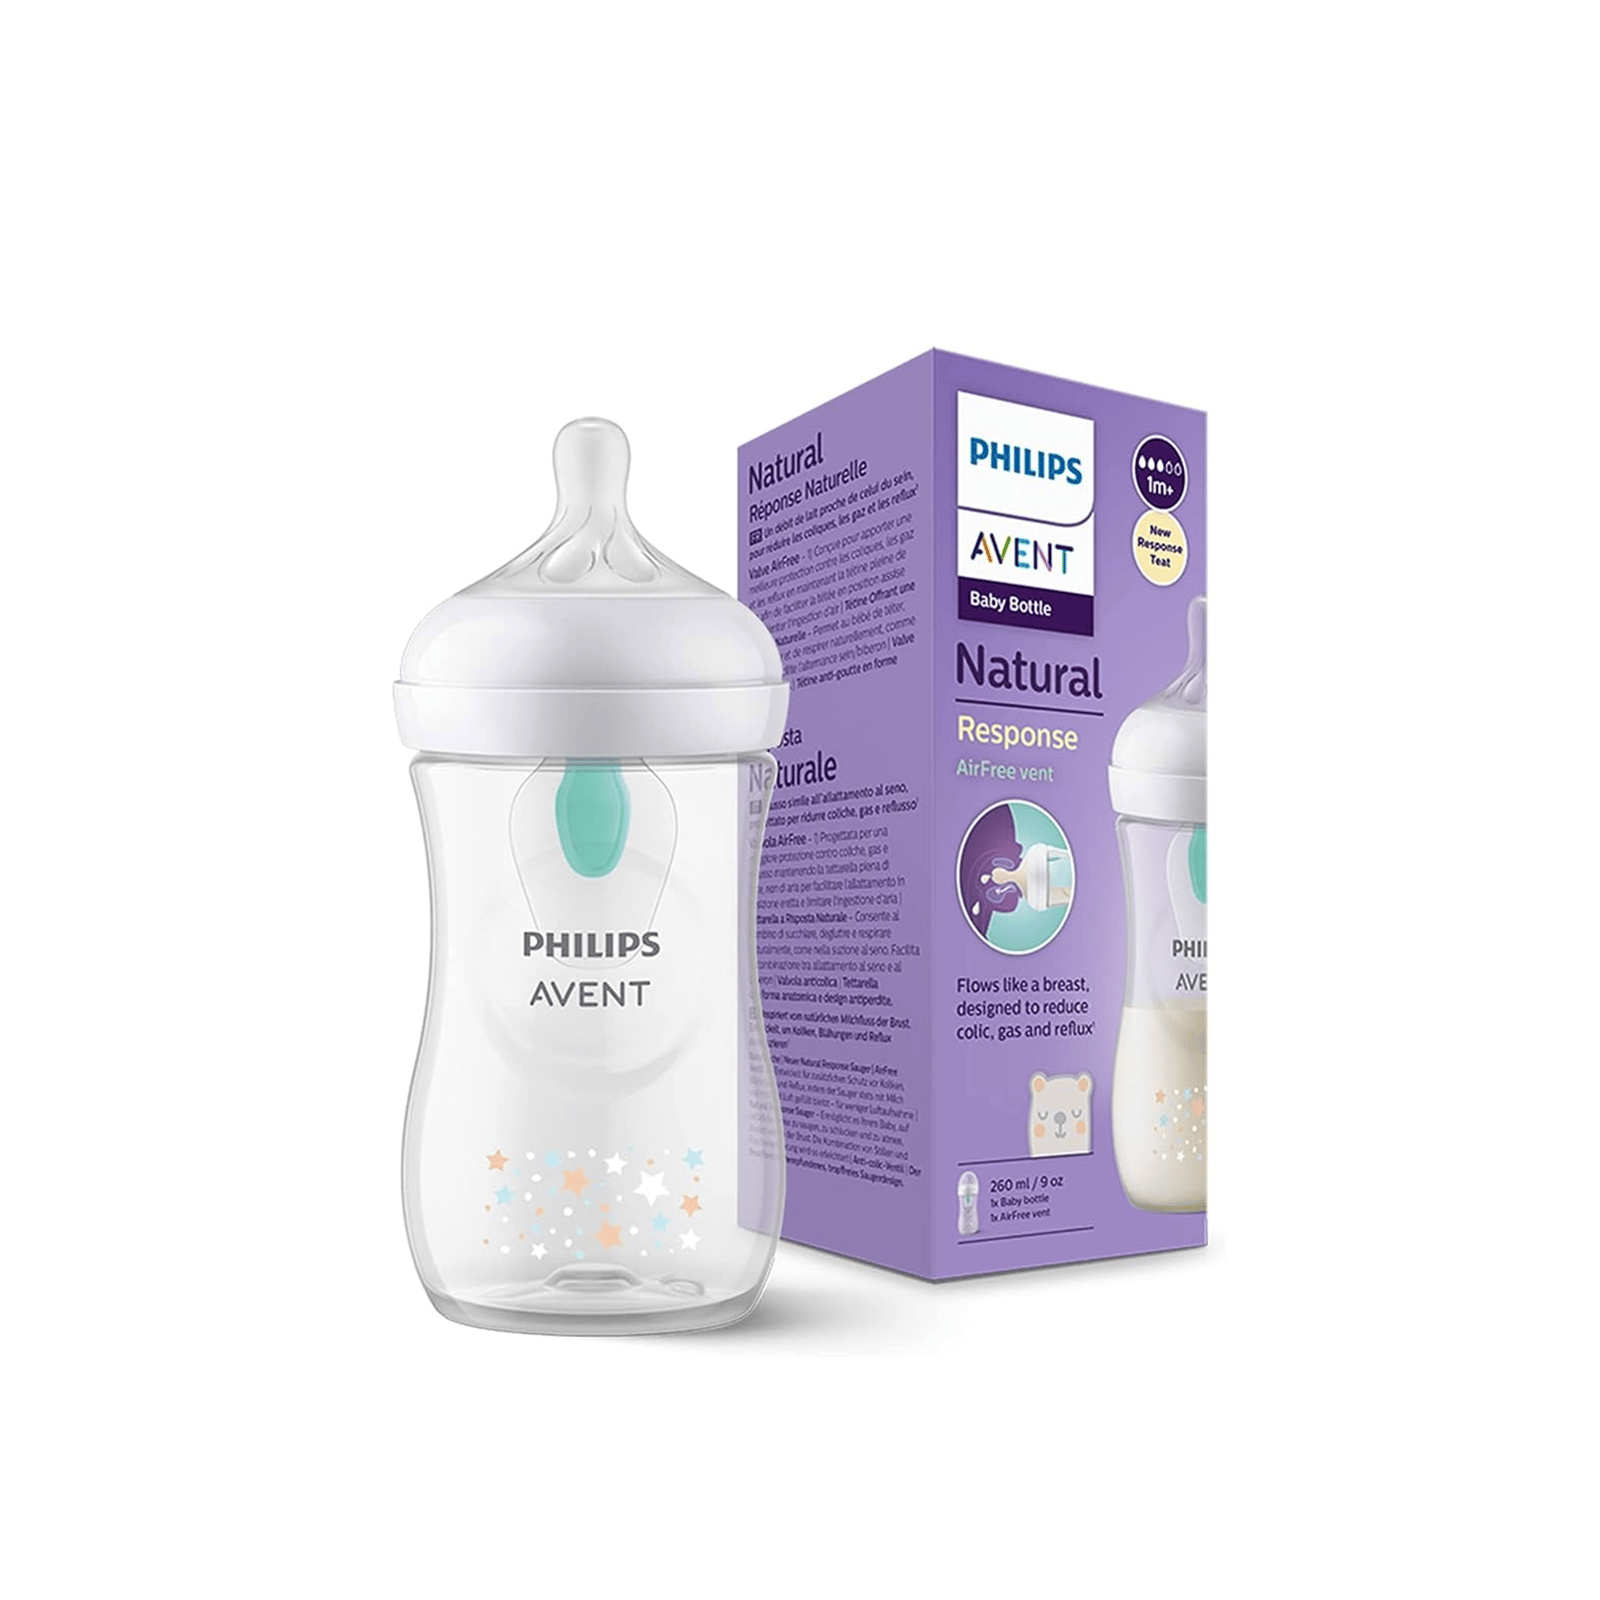 https://static.beautytocare.com/cdn-cgi/image/width=1600,height=1600,f=auto/media/catalog/product//p/h/philips-avent-natural-response-airfree-vent-baby-bottle-1m-bear-260ml.png